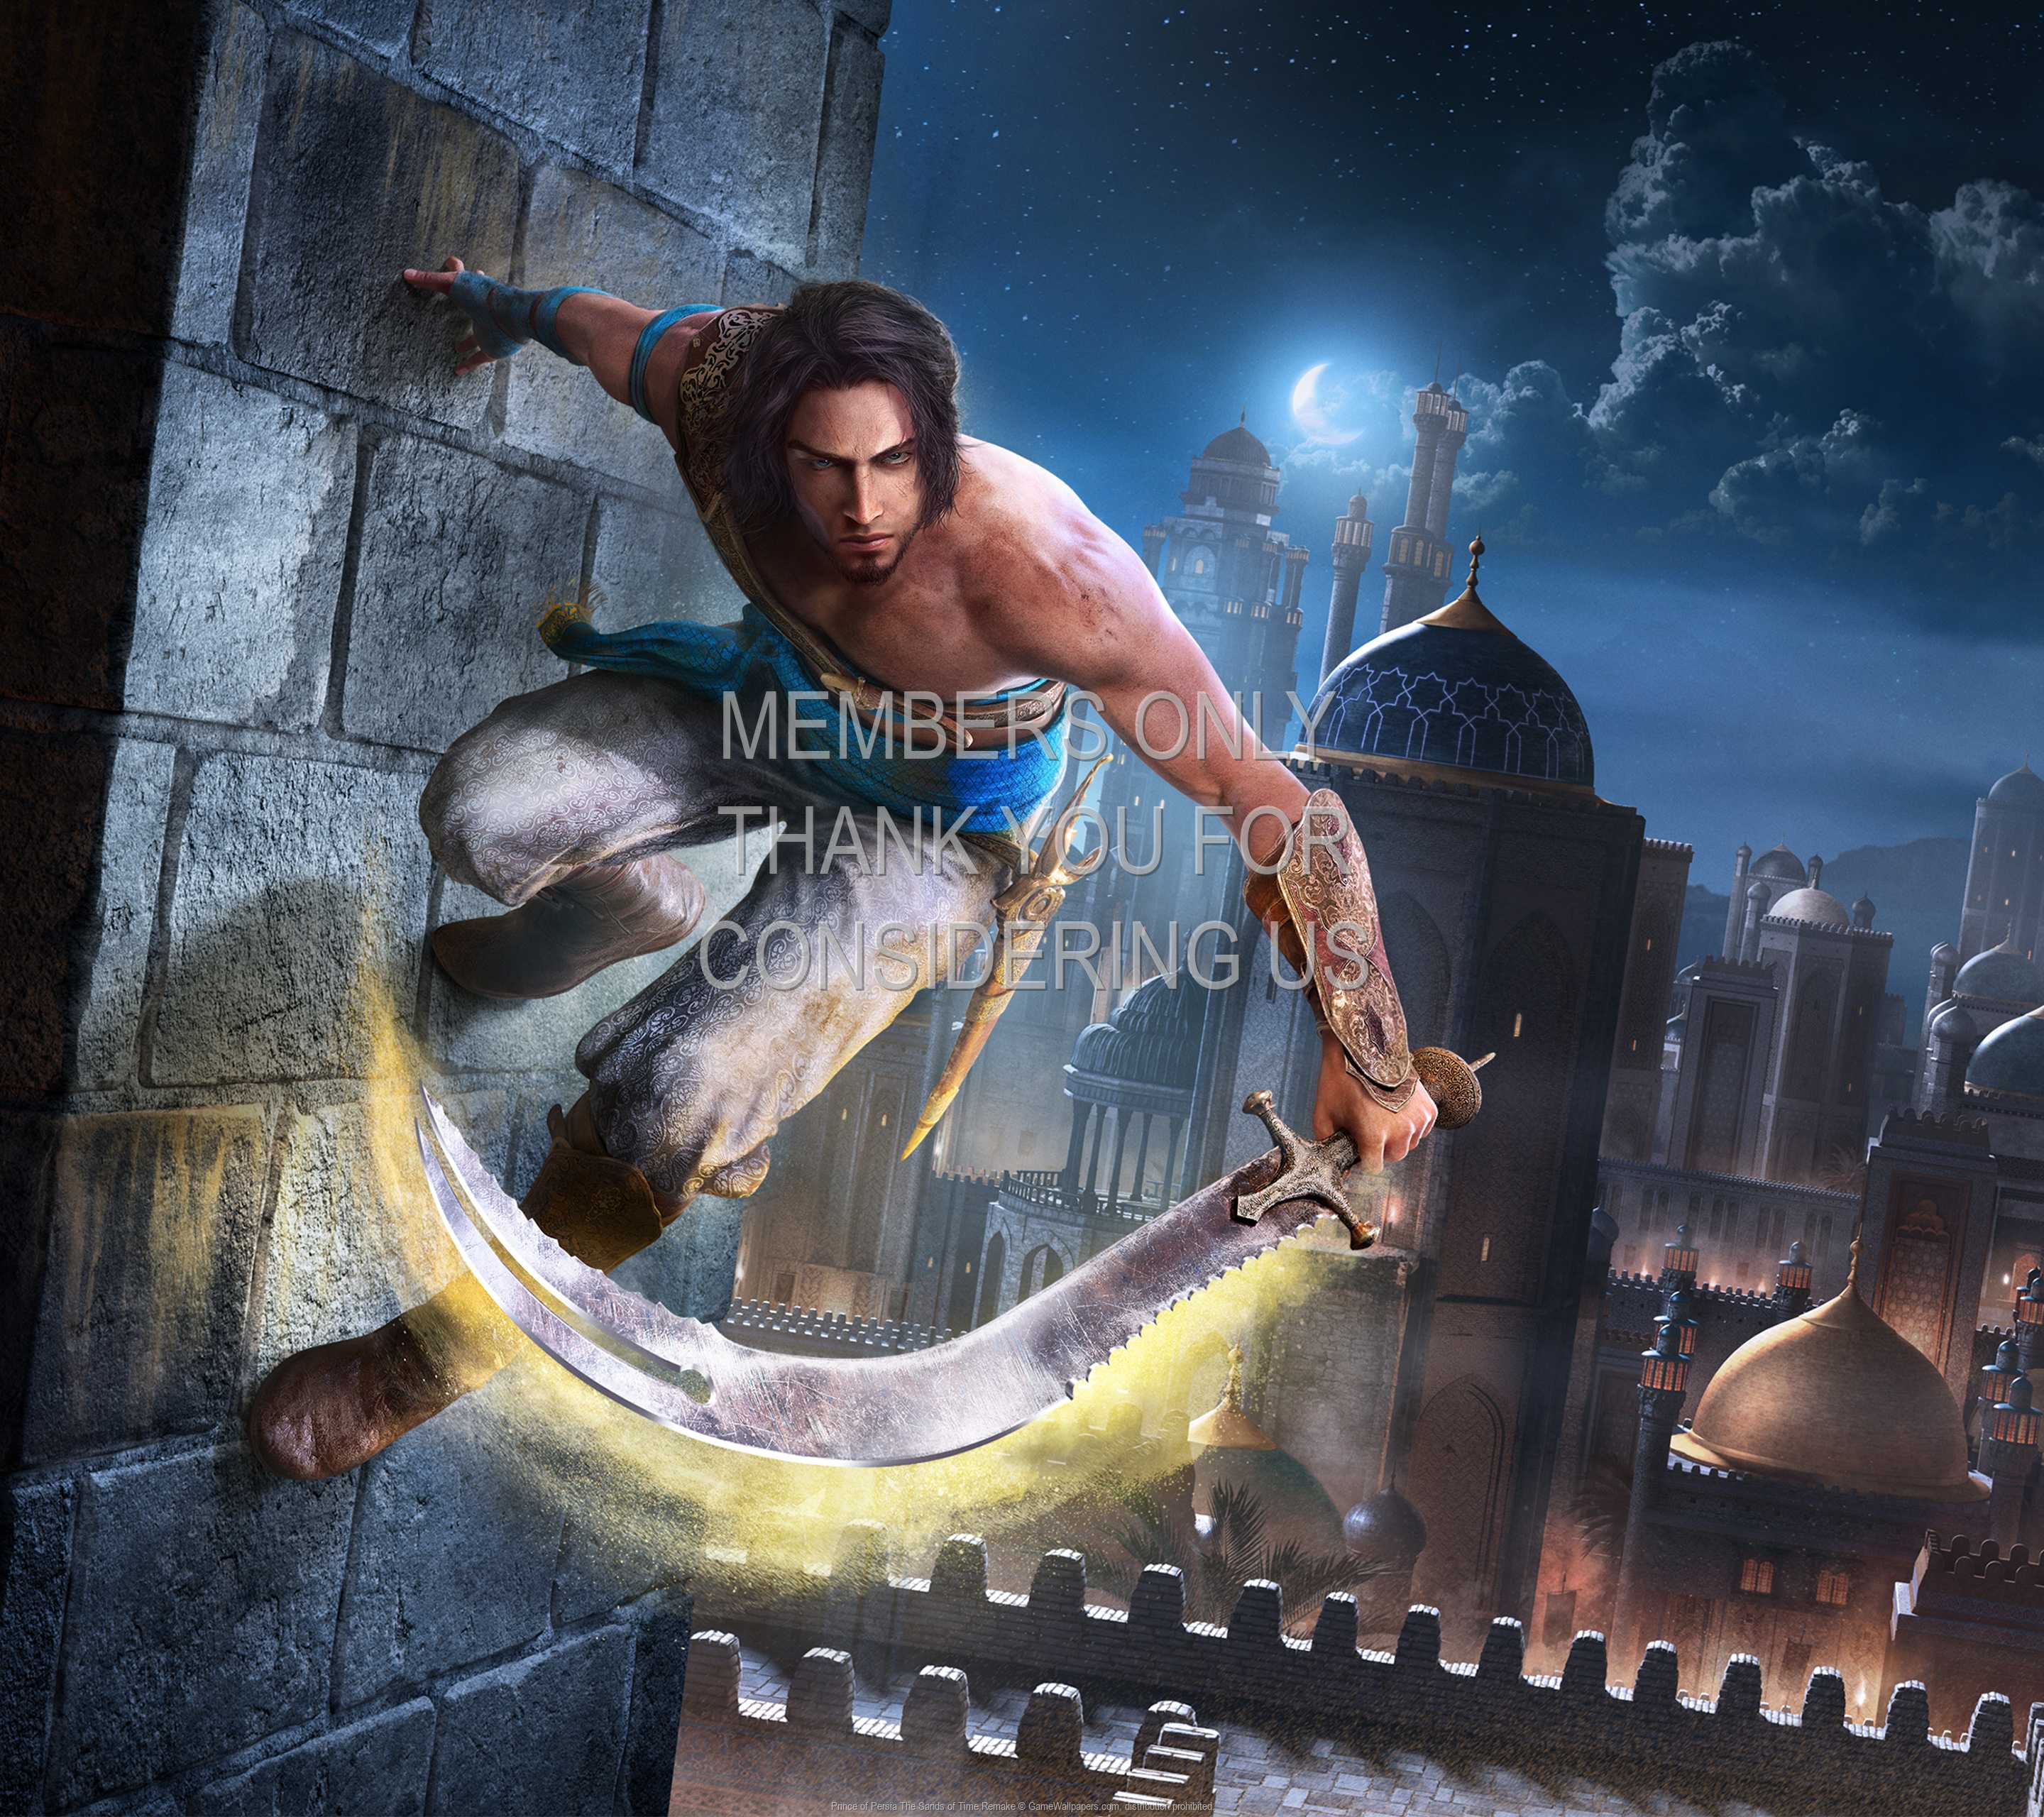 Prince of Persia: The Sands of Time Remake 1440p Horizontal Mobiele achtergrond 01